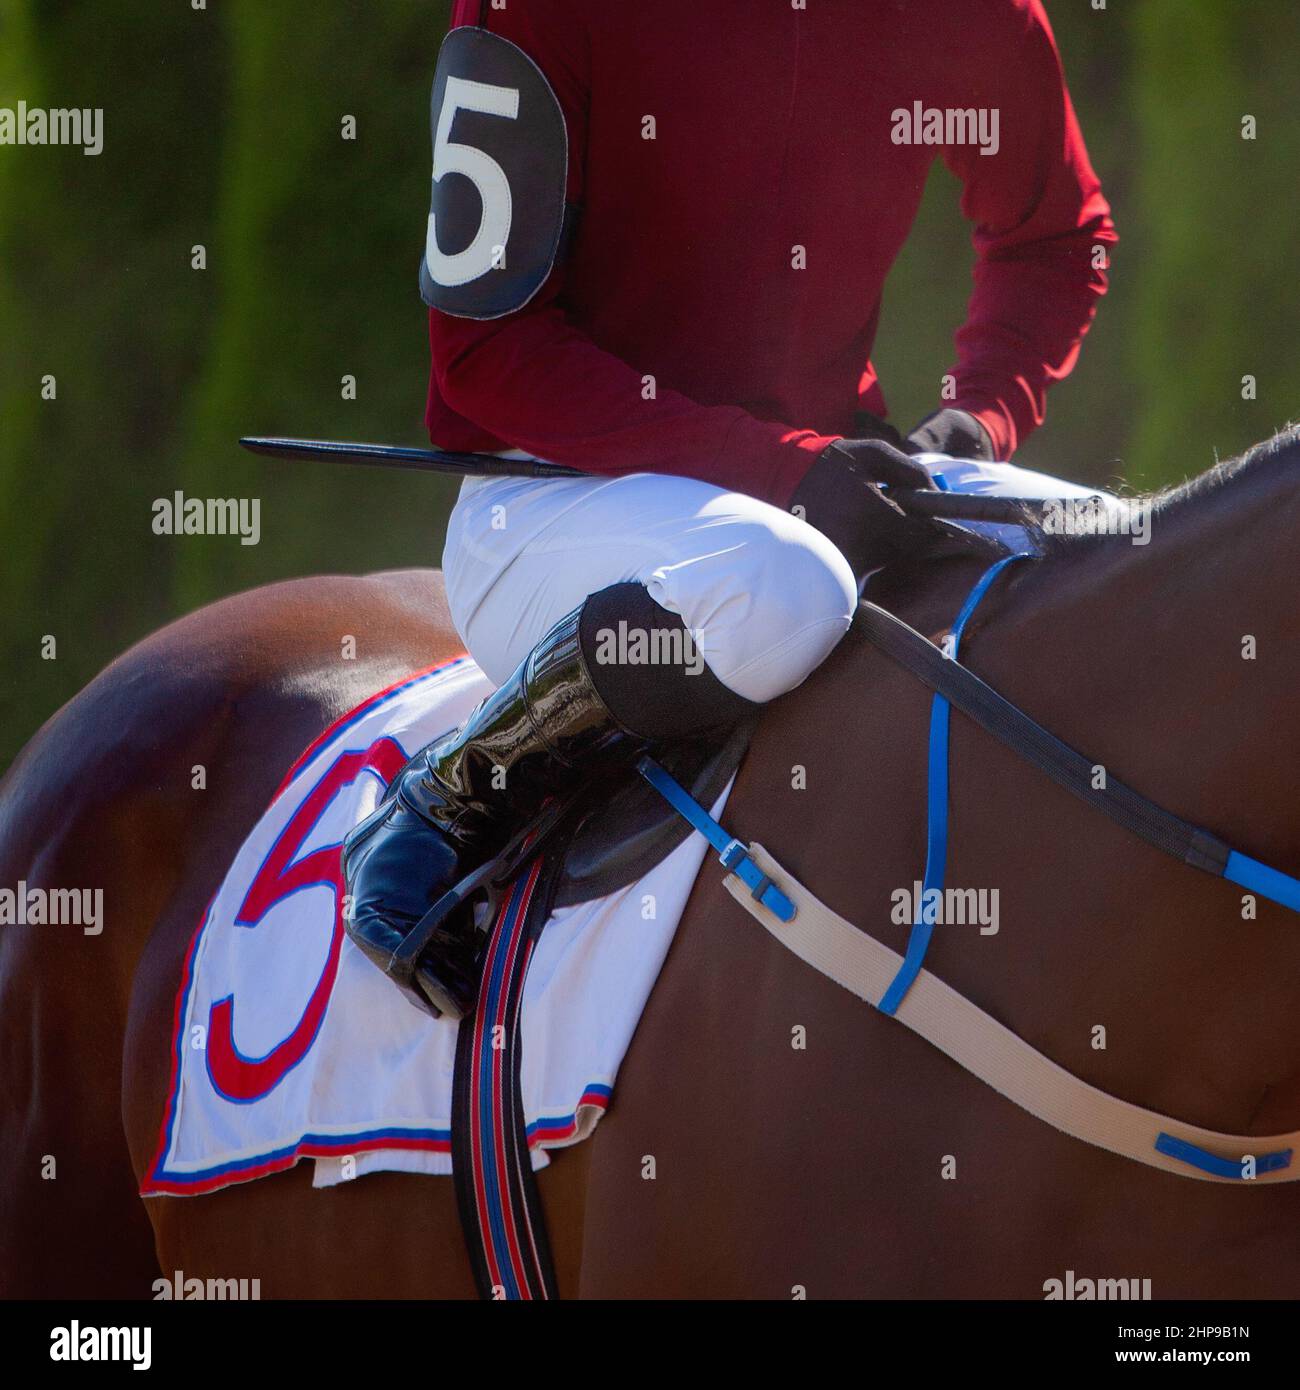 Hands and uniform of a jockey. Race horse in racing competition. Jockey on racing horse. Sport. Champion. Hippodrome. Equestrian. Derby. Closeup Stock Photo